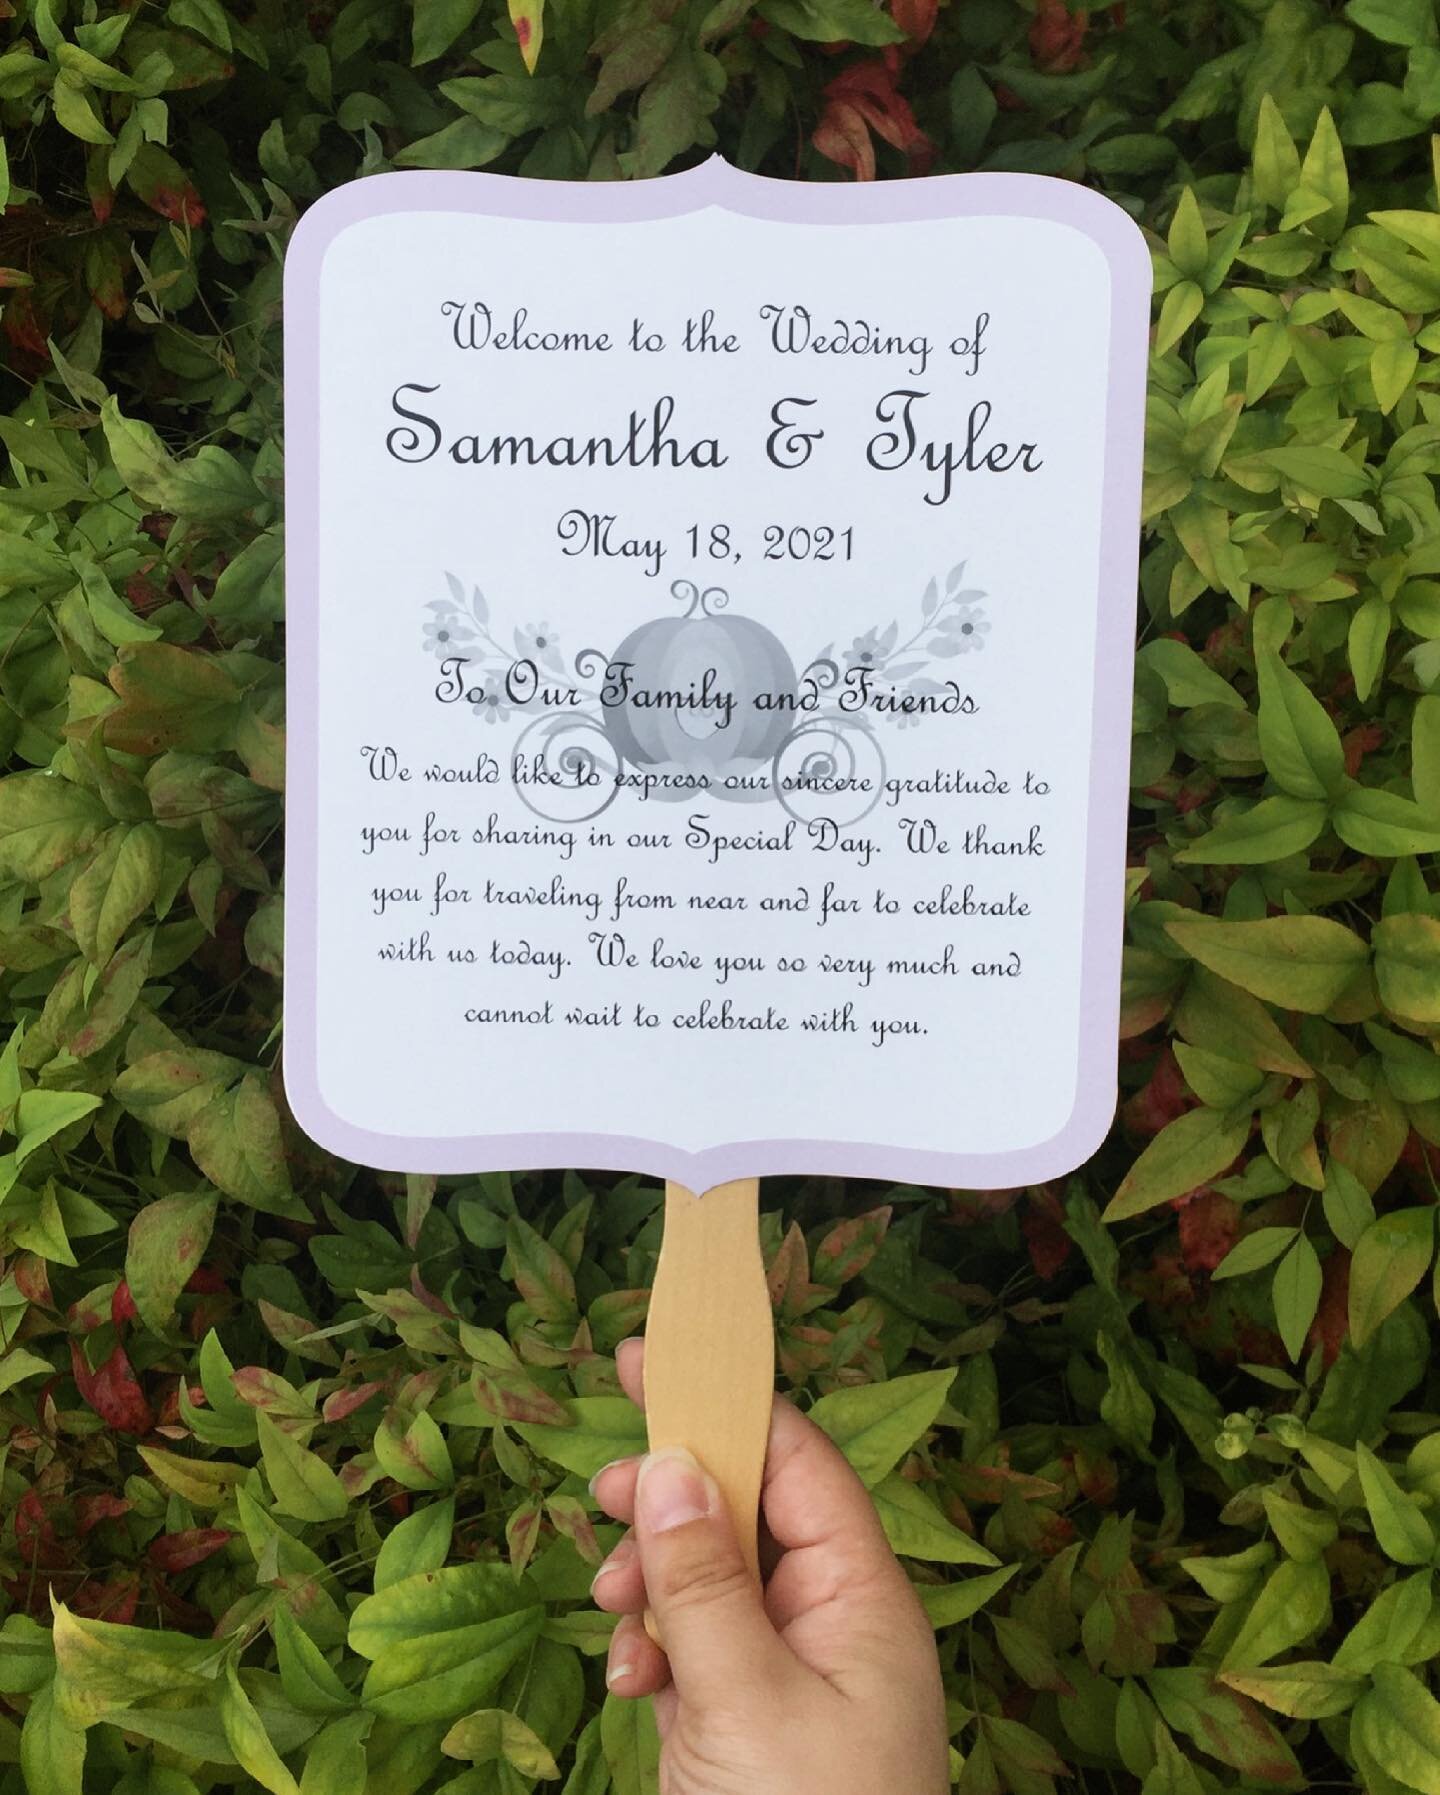 Here&rsquo;s another really cool piece of #wedding collateral. With restrictions being lifted, event season is finally coming back! Here we have a piece by @pbakerjewelrylady. A double duty outdoor wedding staple: program fans! These handy little guy